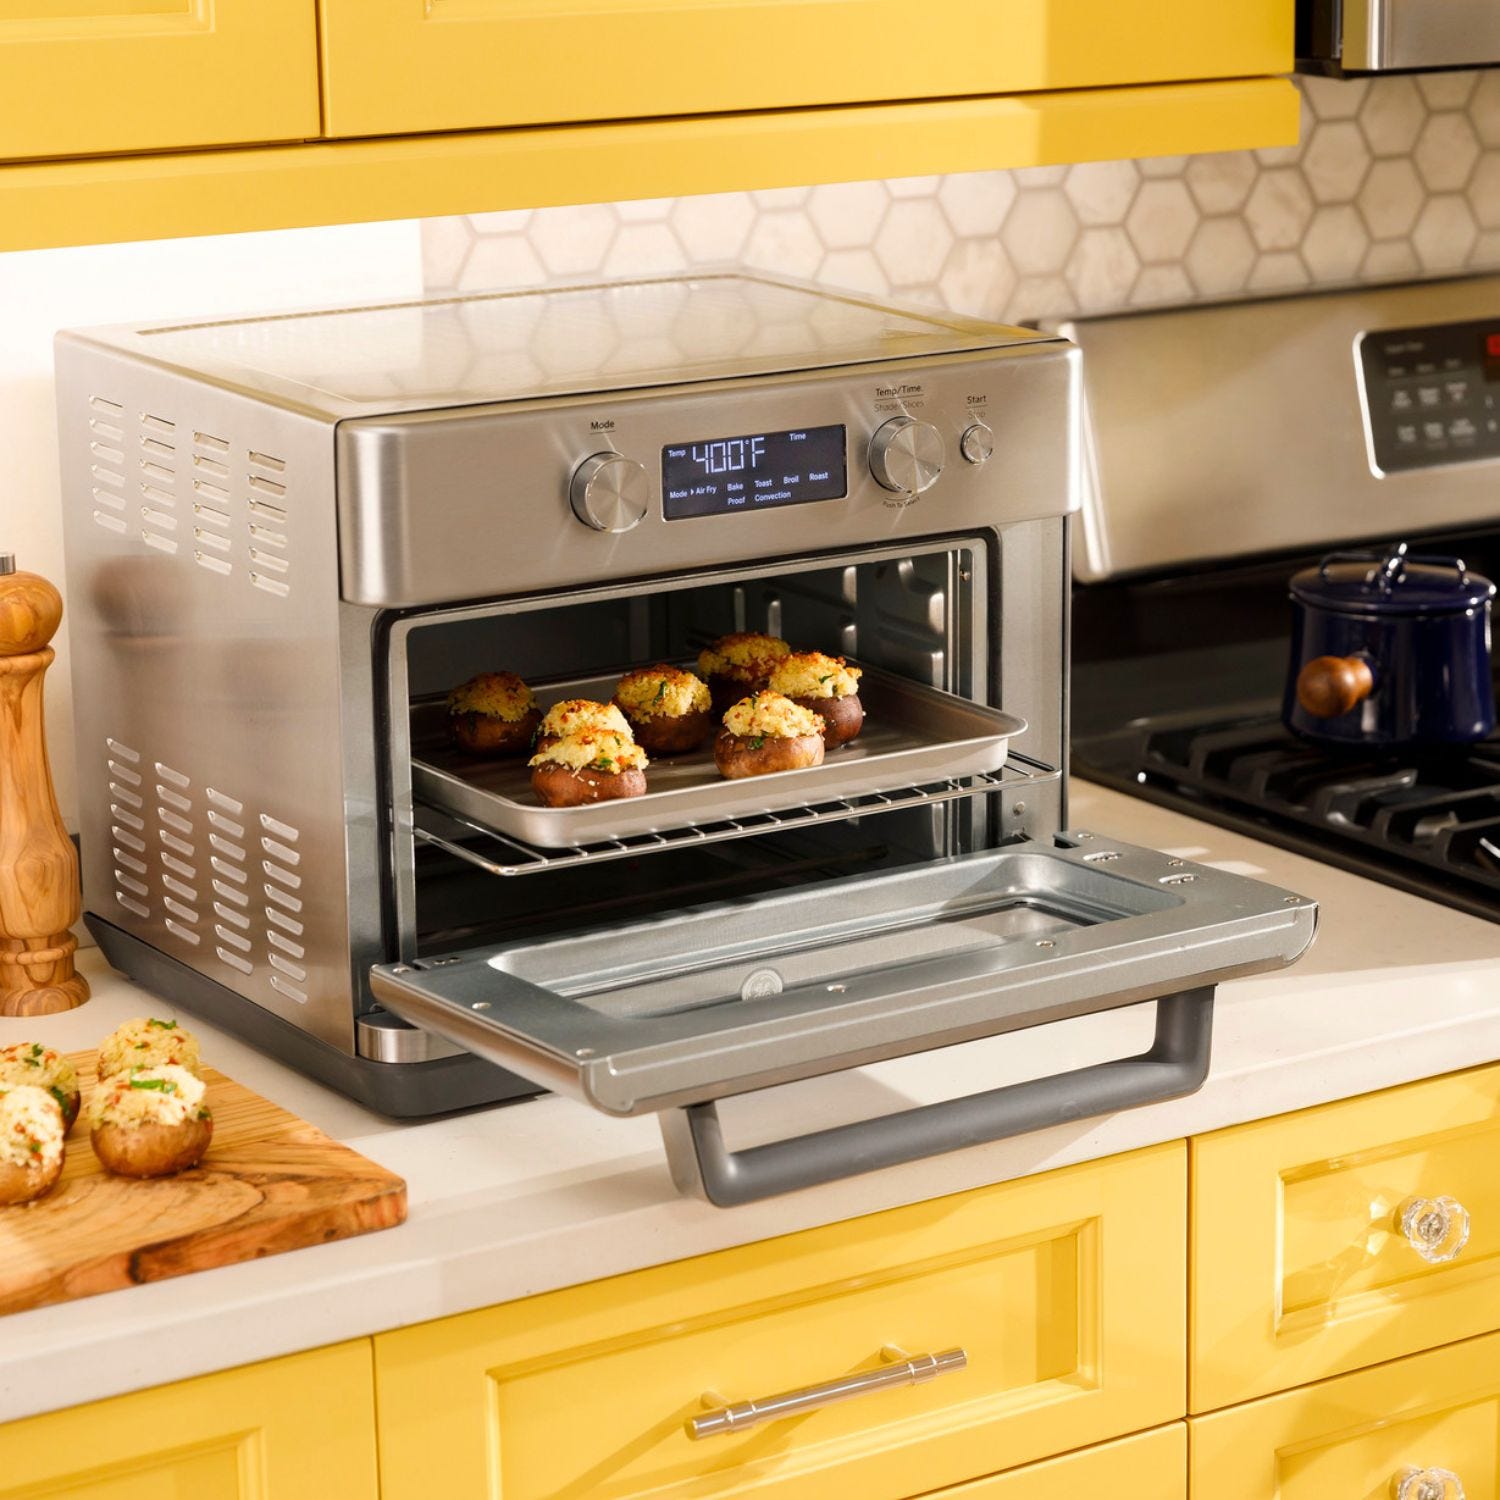 Stainless steel countertop oven with digital display cooking food, placed on a yellow kitchen counter beside a stovetop.